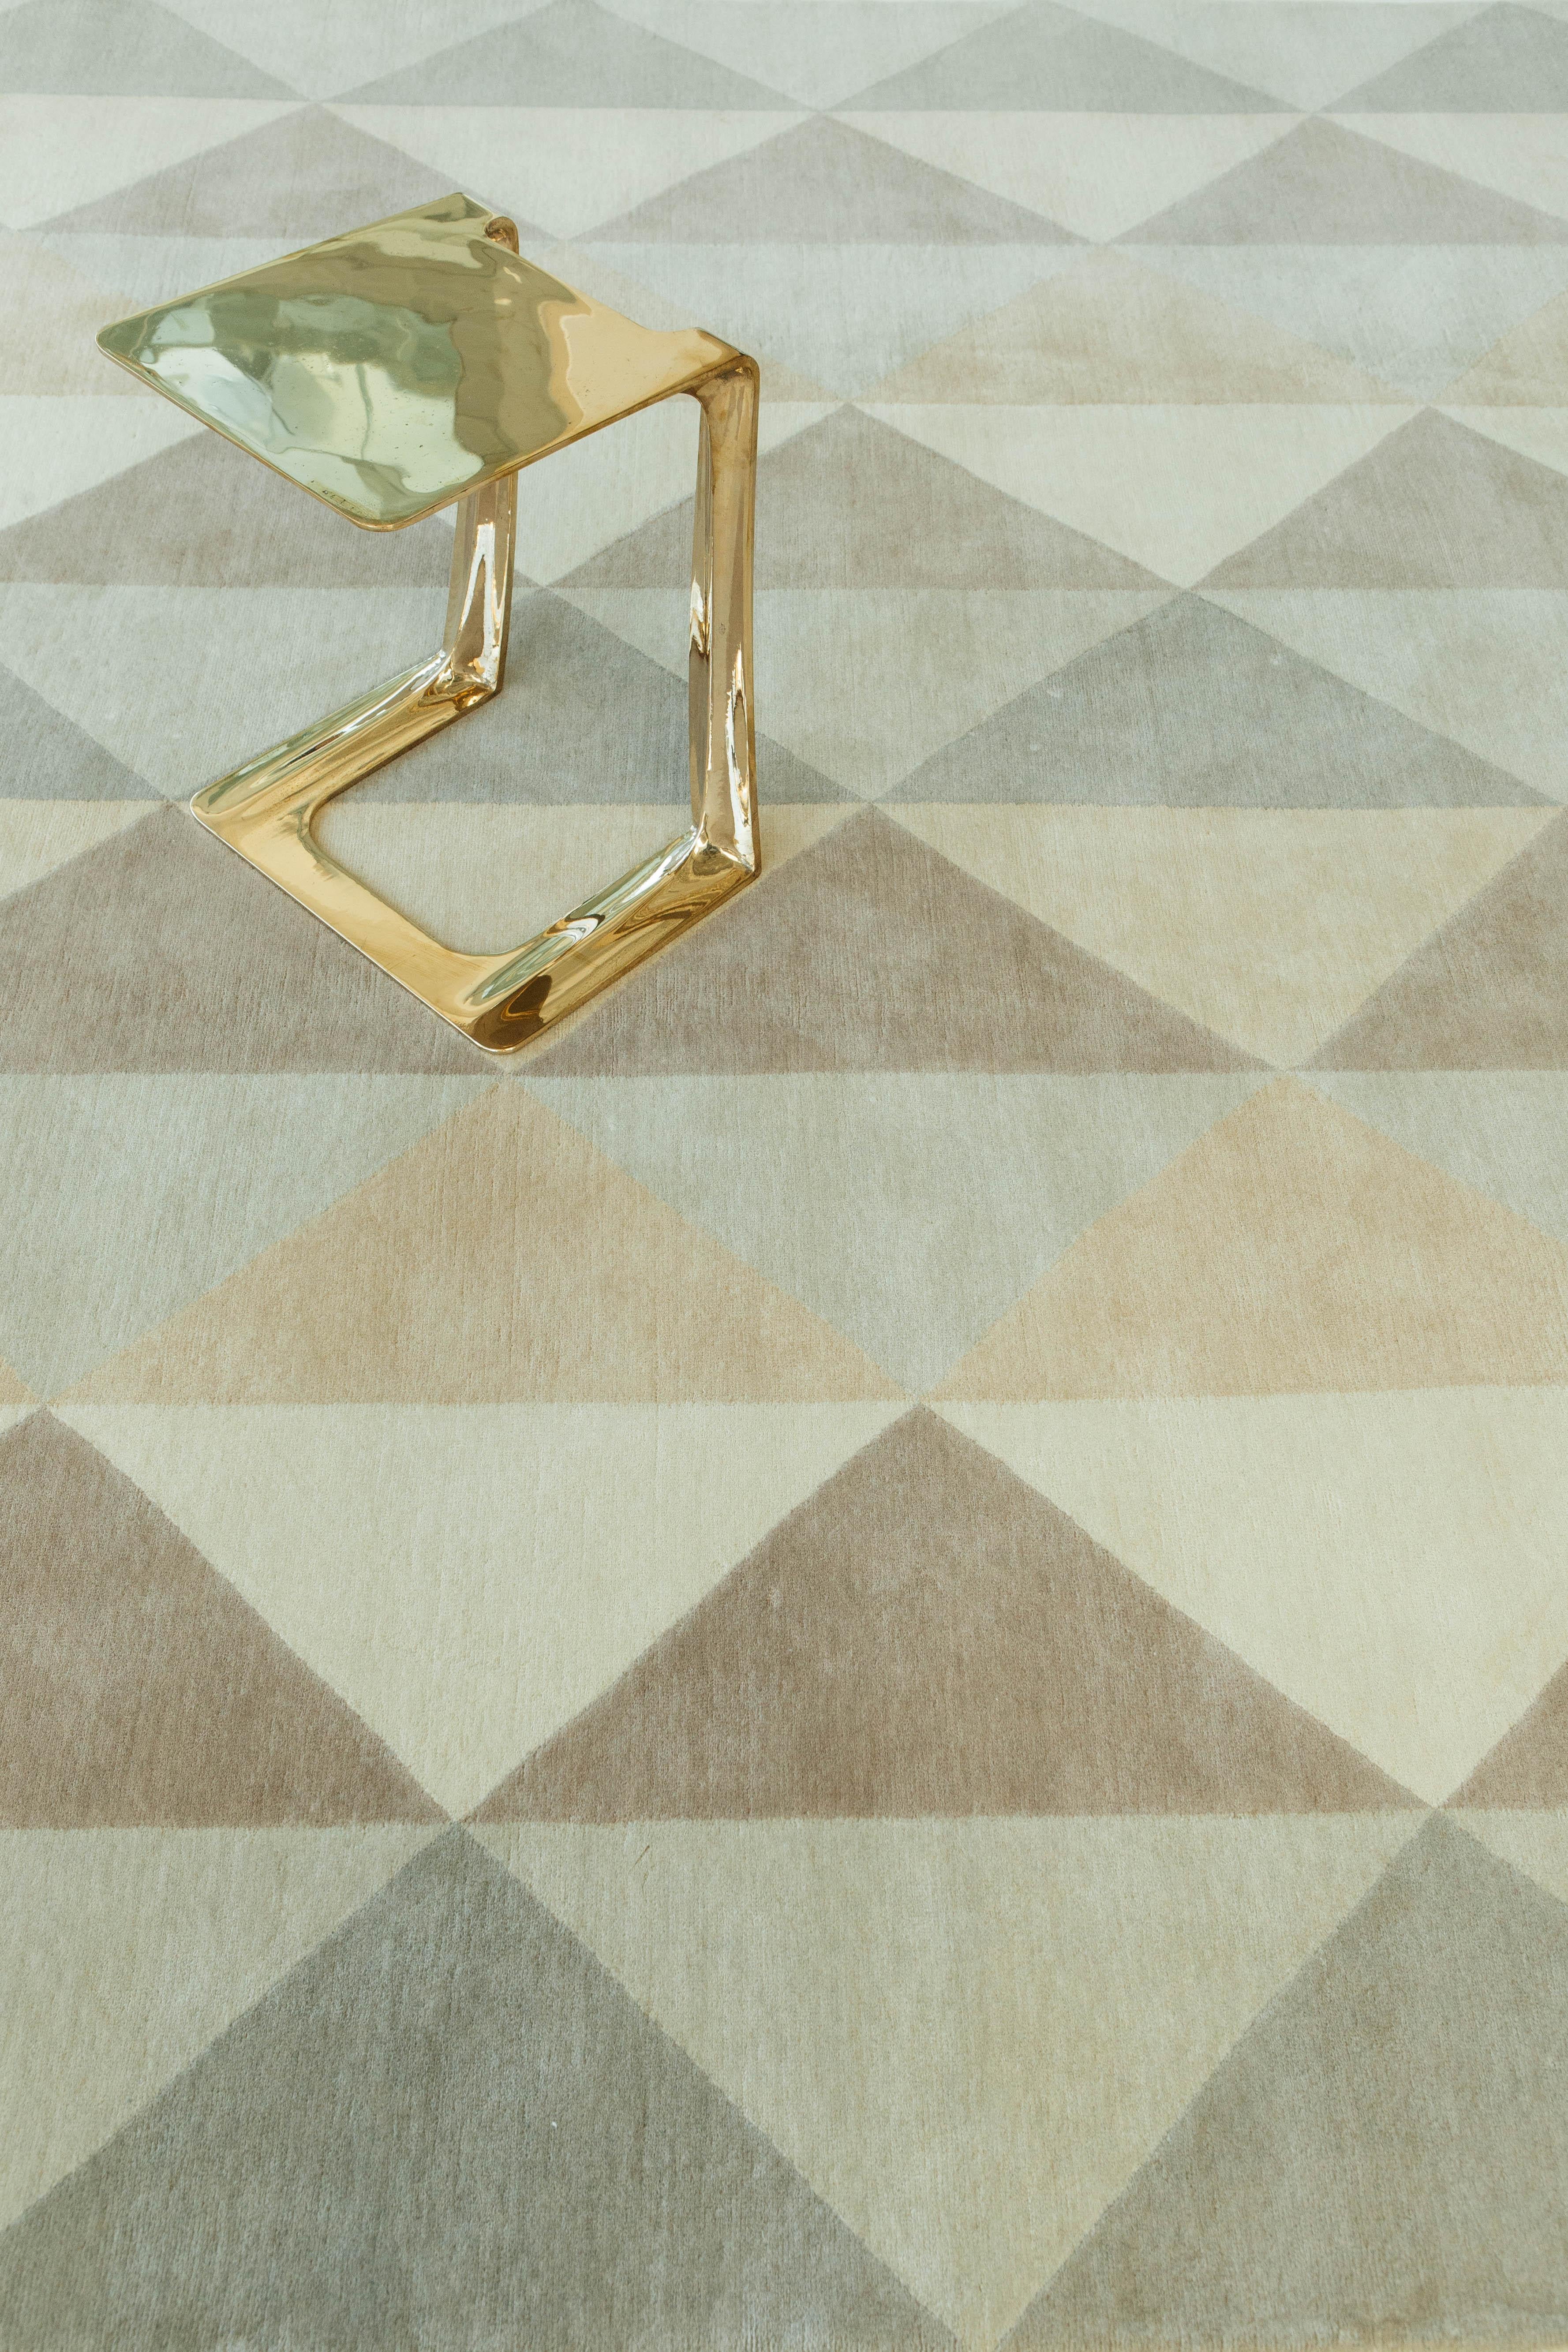 Hand-Woven Tramezzini Rug by FORM Design Studio, Baci Collection from Mehraban For Sale